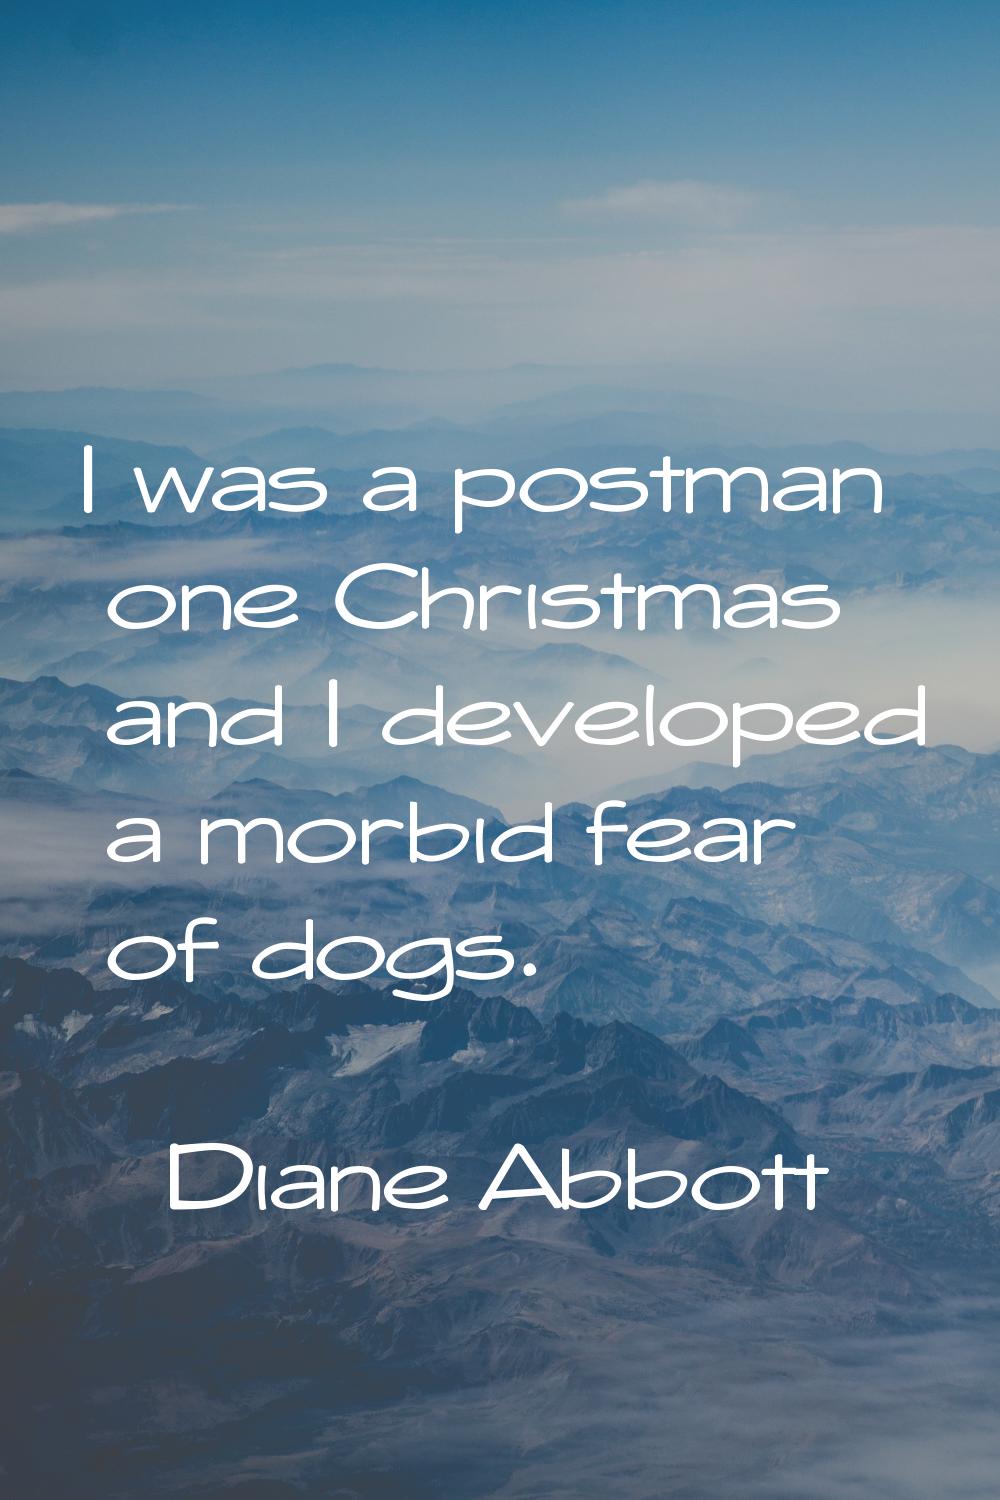 I was a postman one Christmas and I developed a morbid fear of dogs.